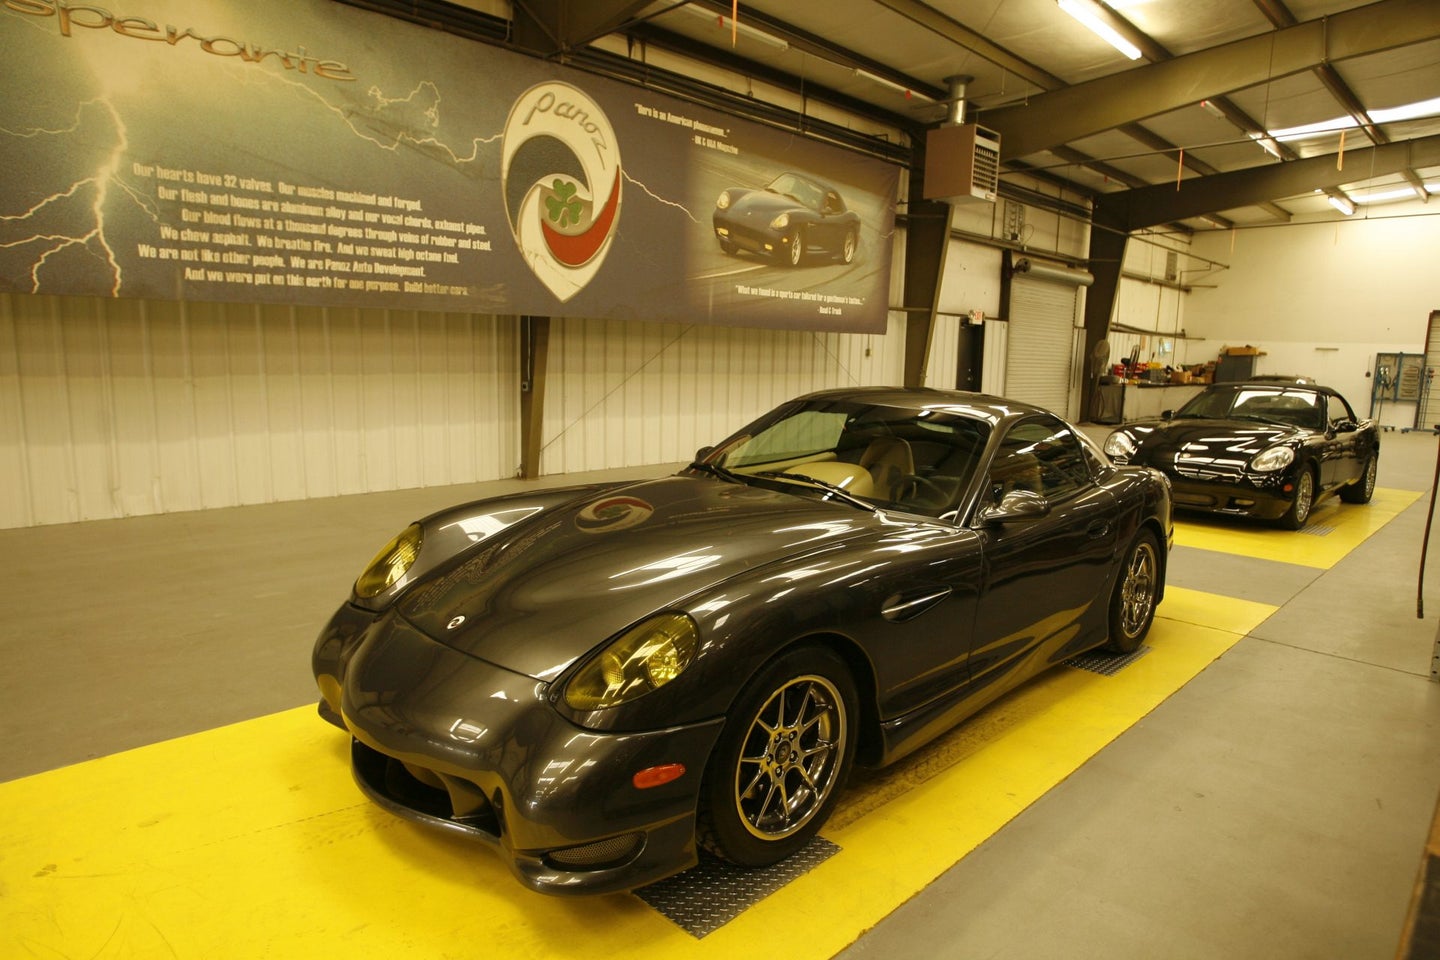 Mustang Equus Panoz In Atlanta, United States On February 20, 2009.